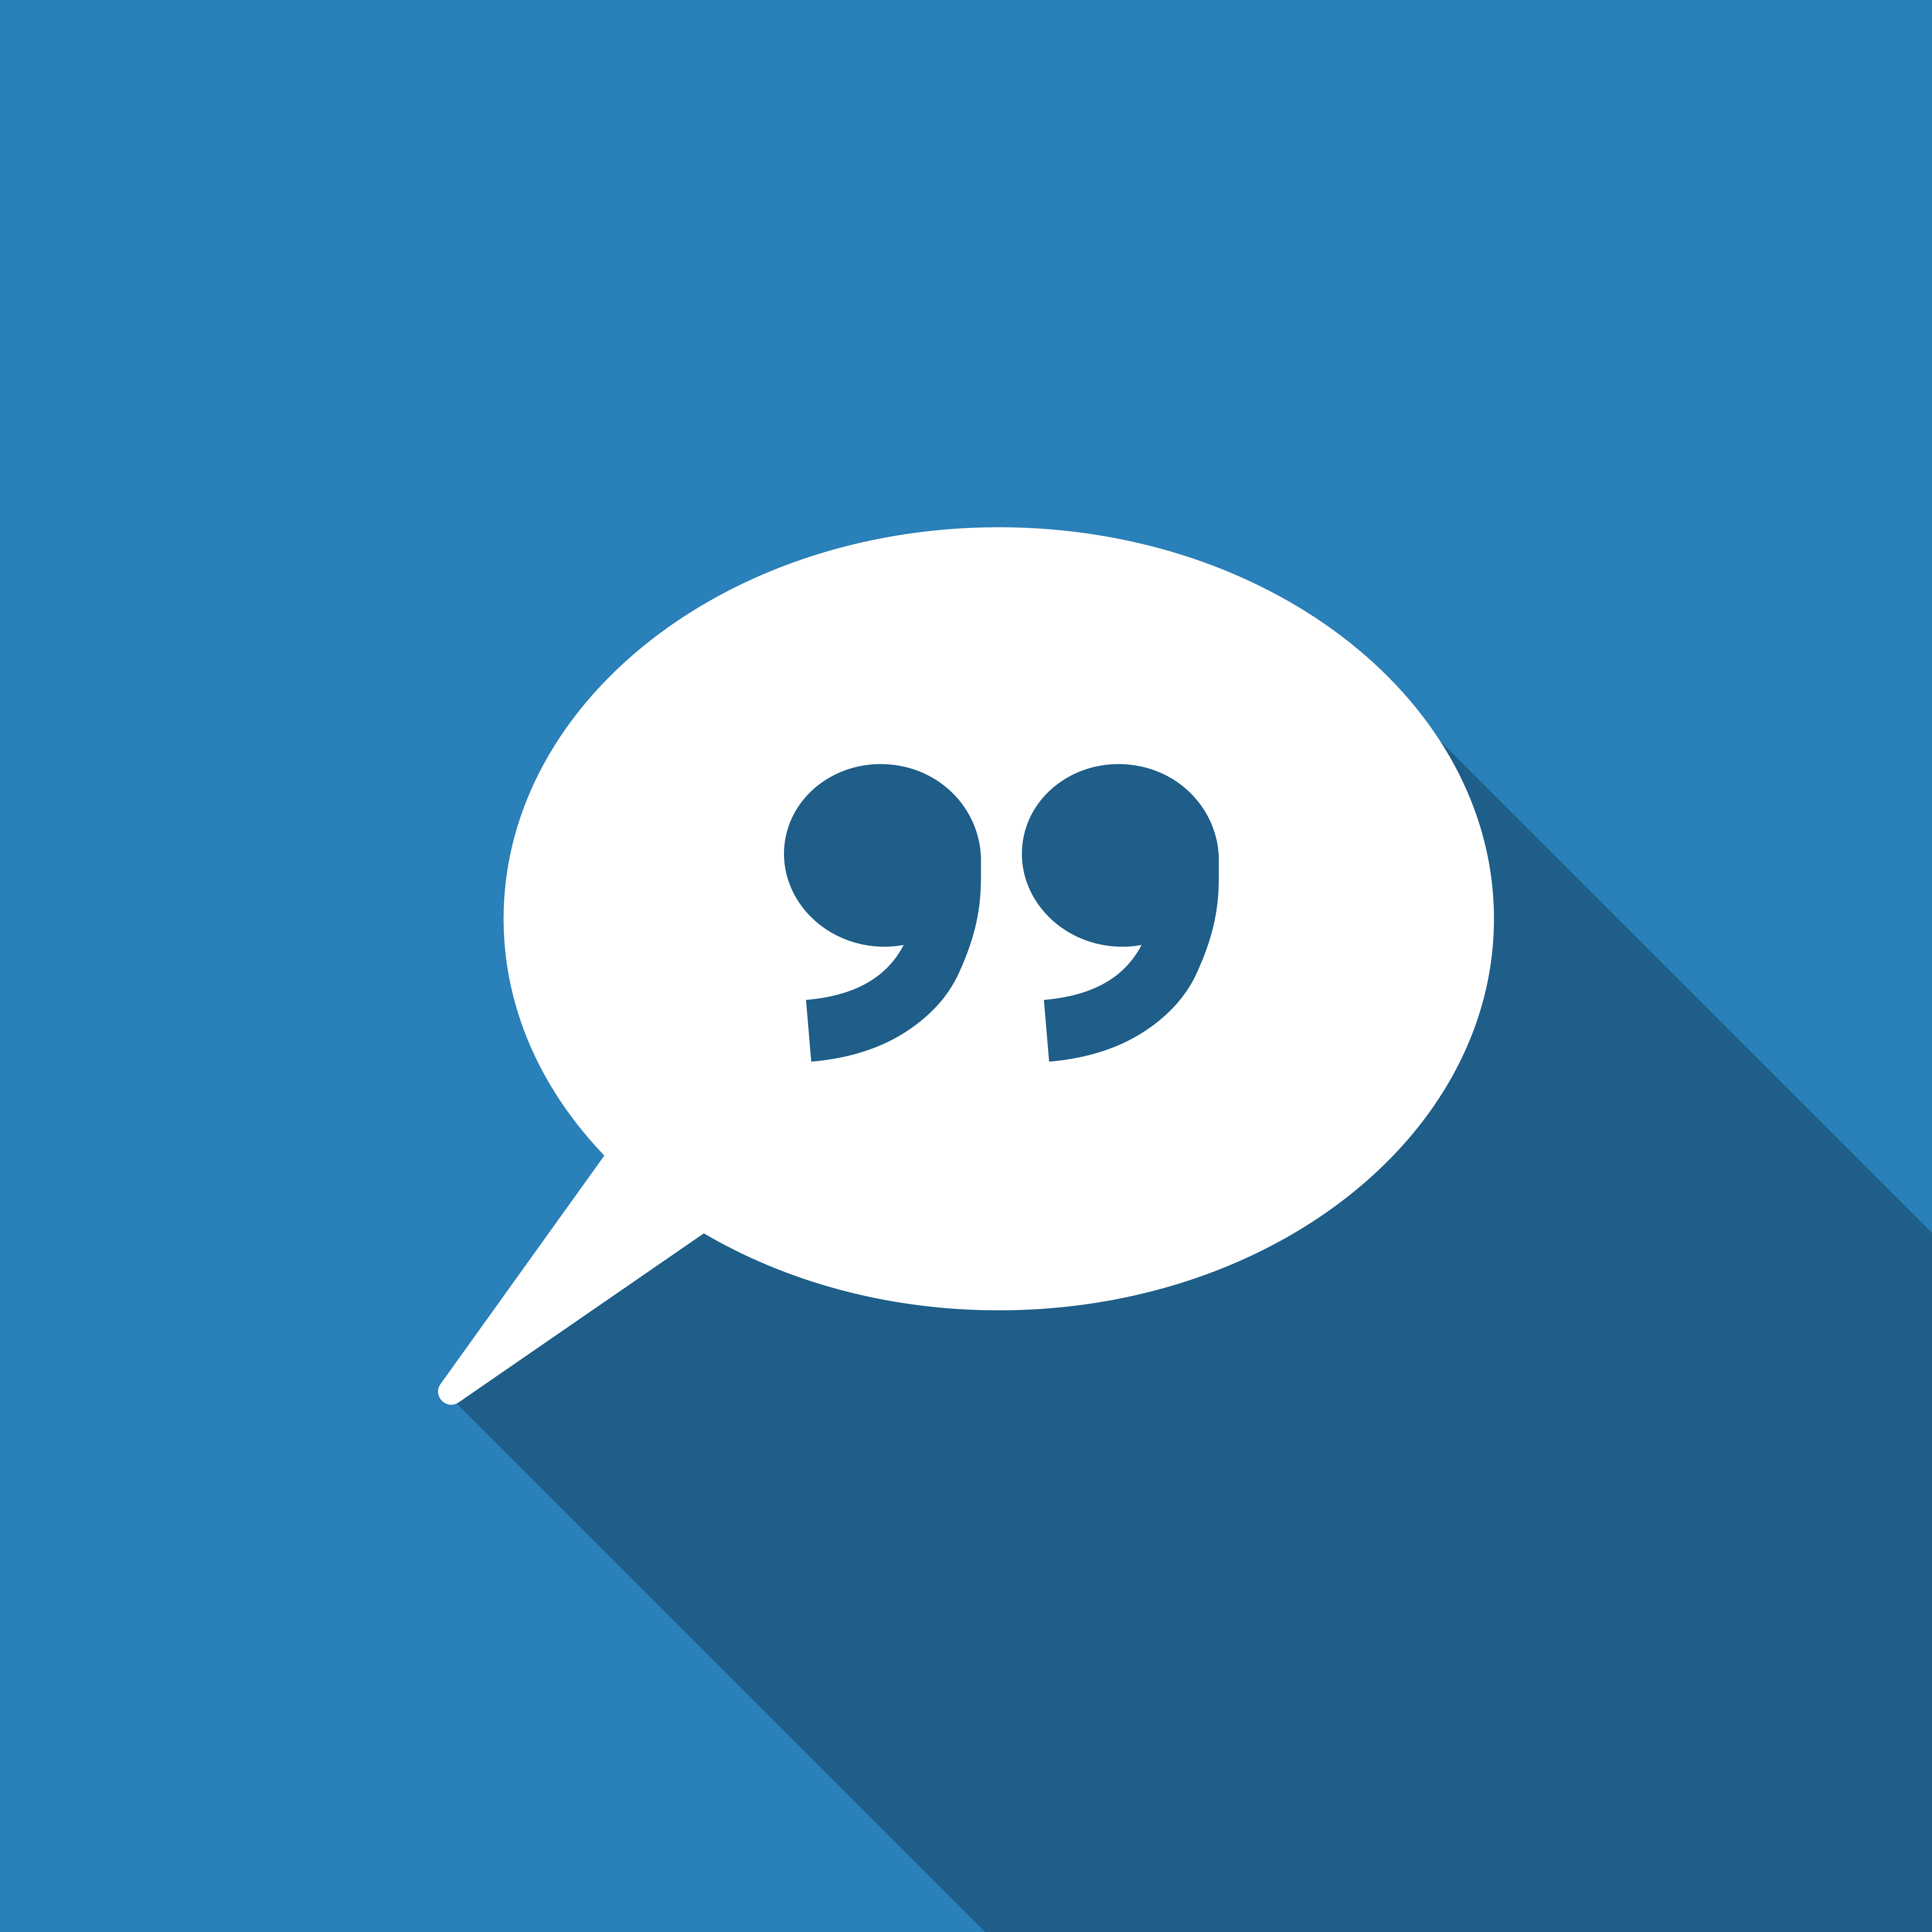 Depositphotos: Quote sign icon with long shadow @ T-Kot